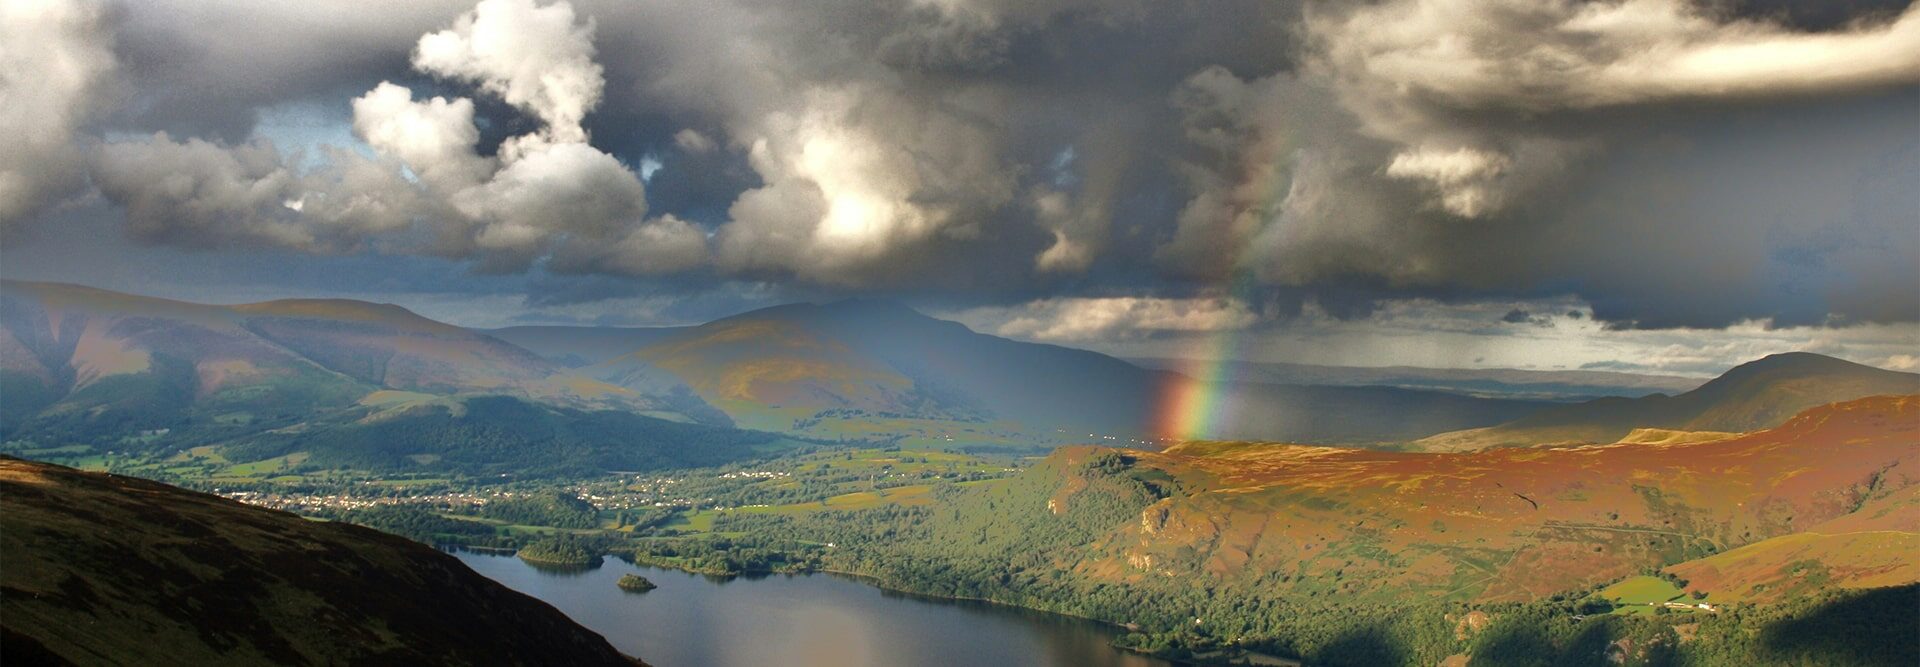 A rainbow is seen over a lake and mountains.